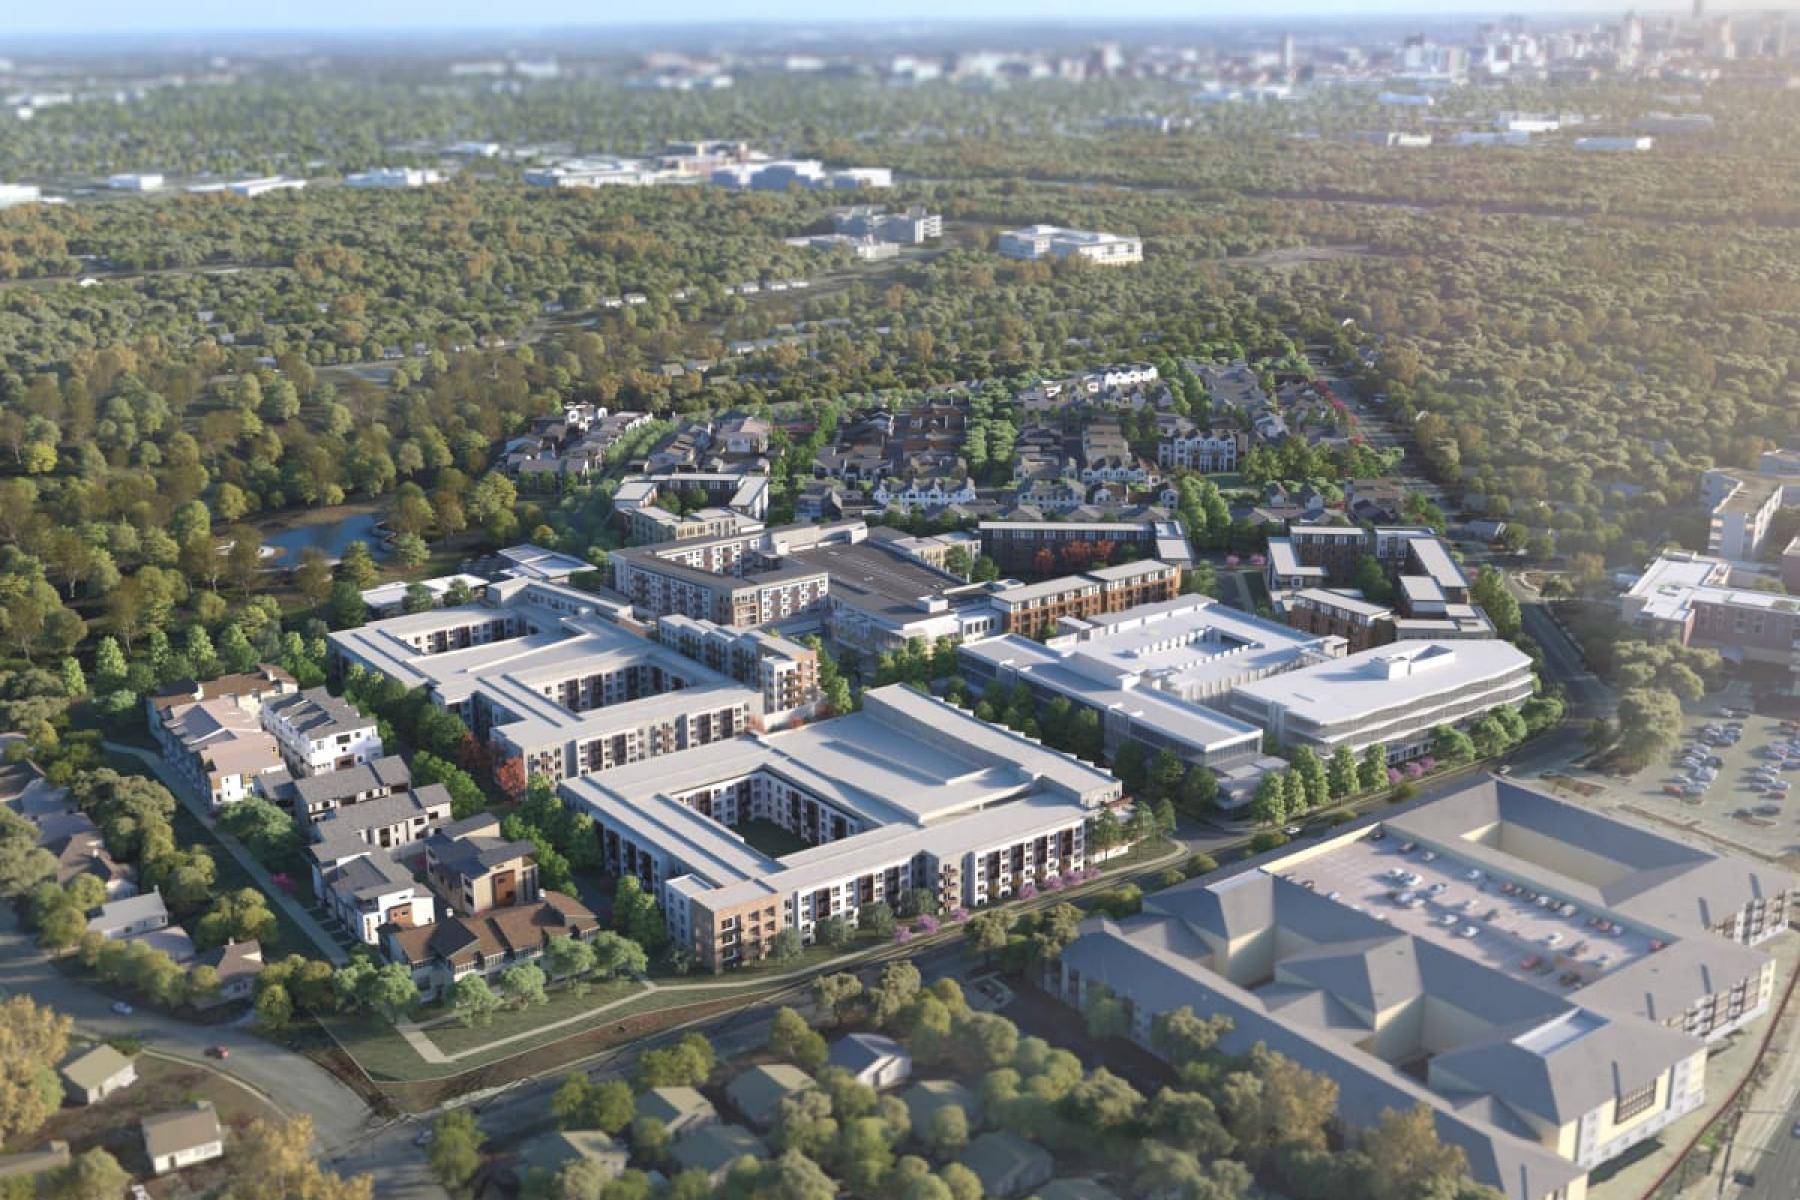 A bird's eye view rendering of Grand Living at The Grove